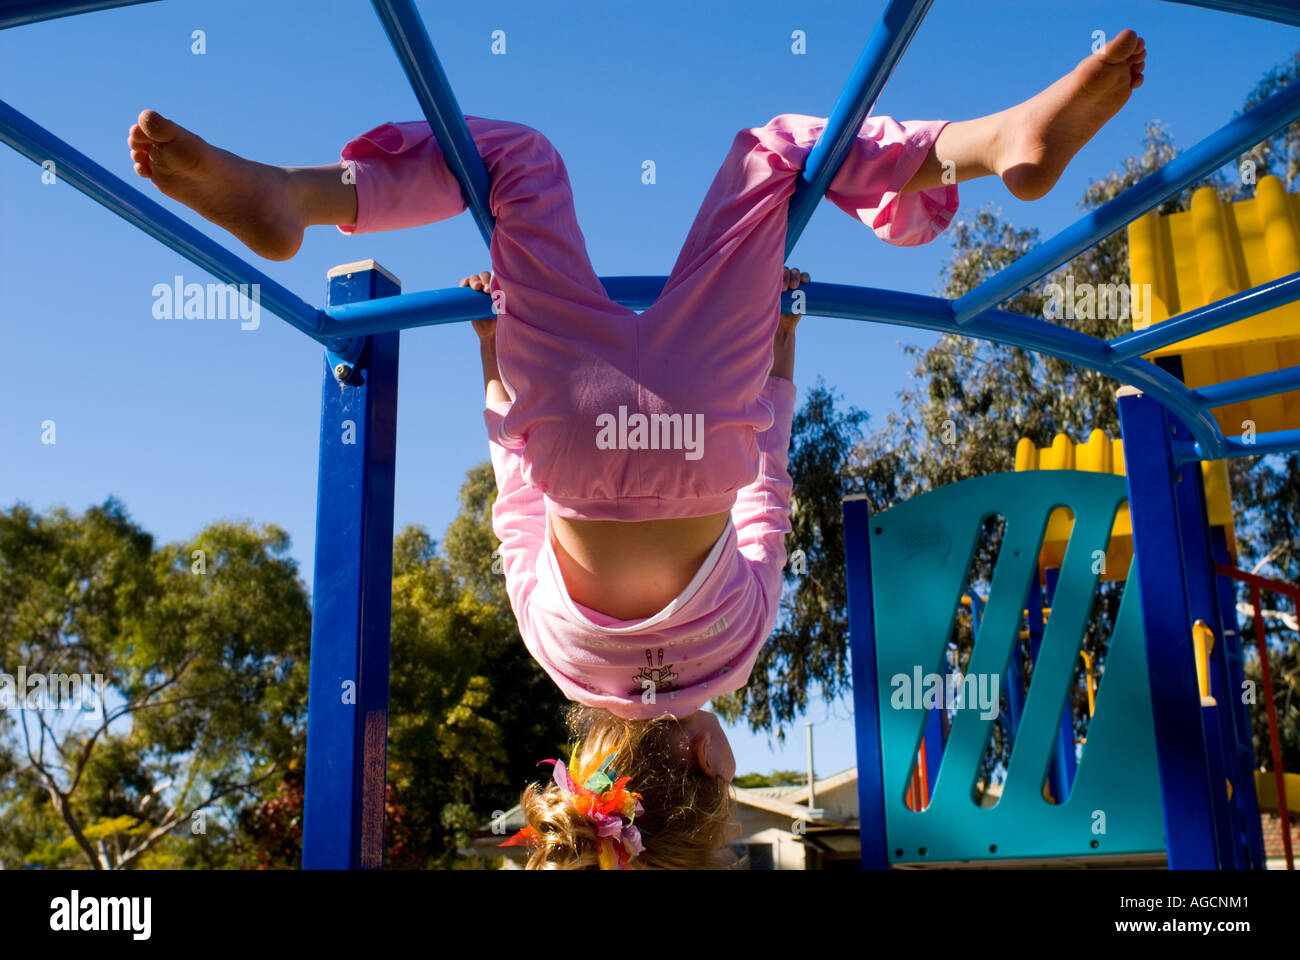 female child hanging upside down on playground climbing frame, against a deep blue sky Stock Photo